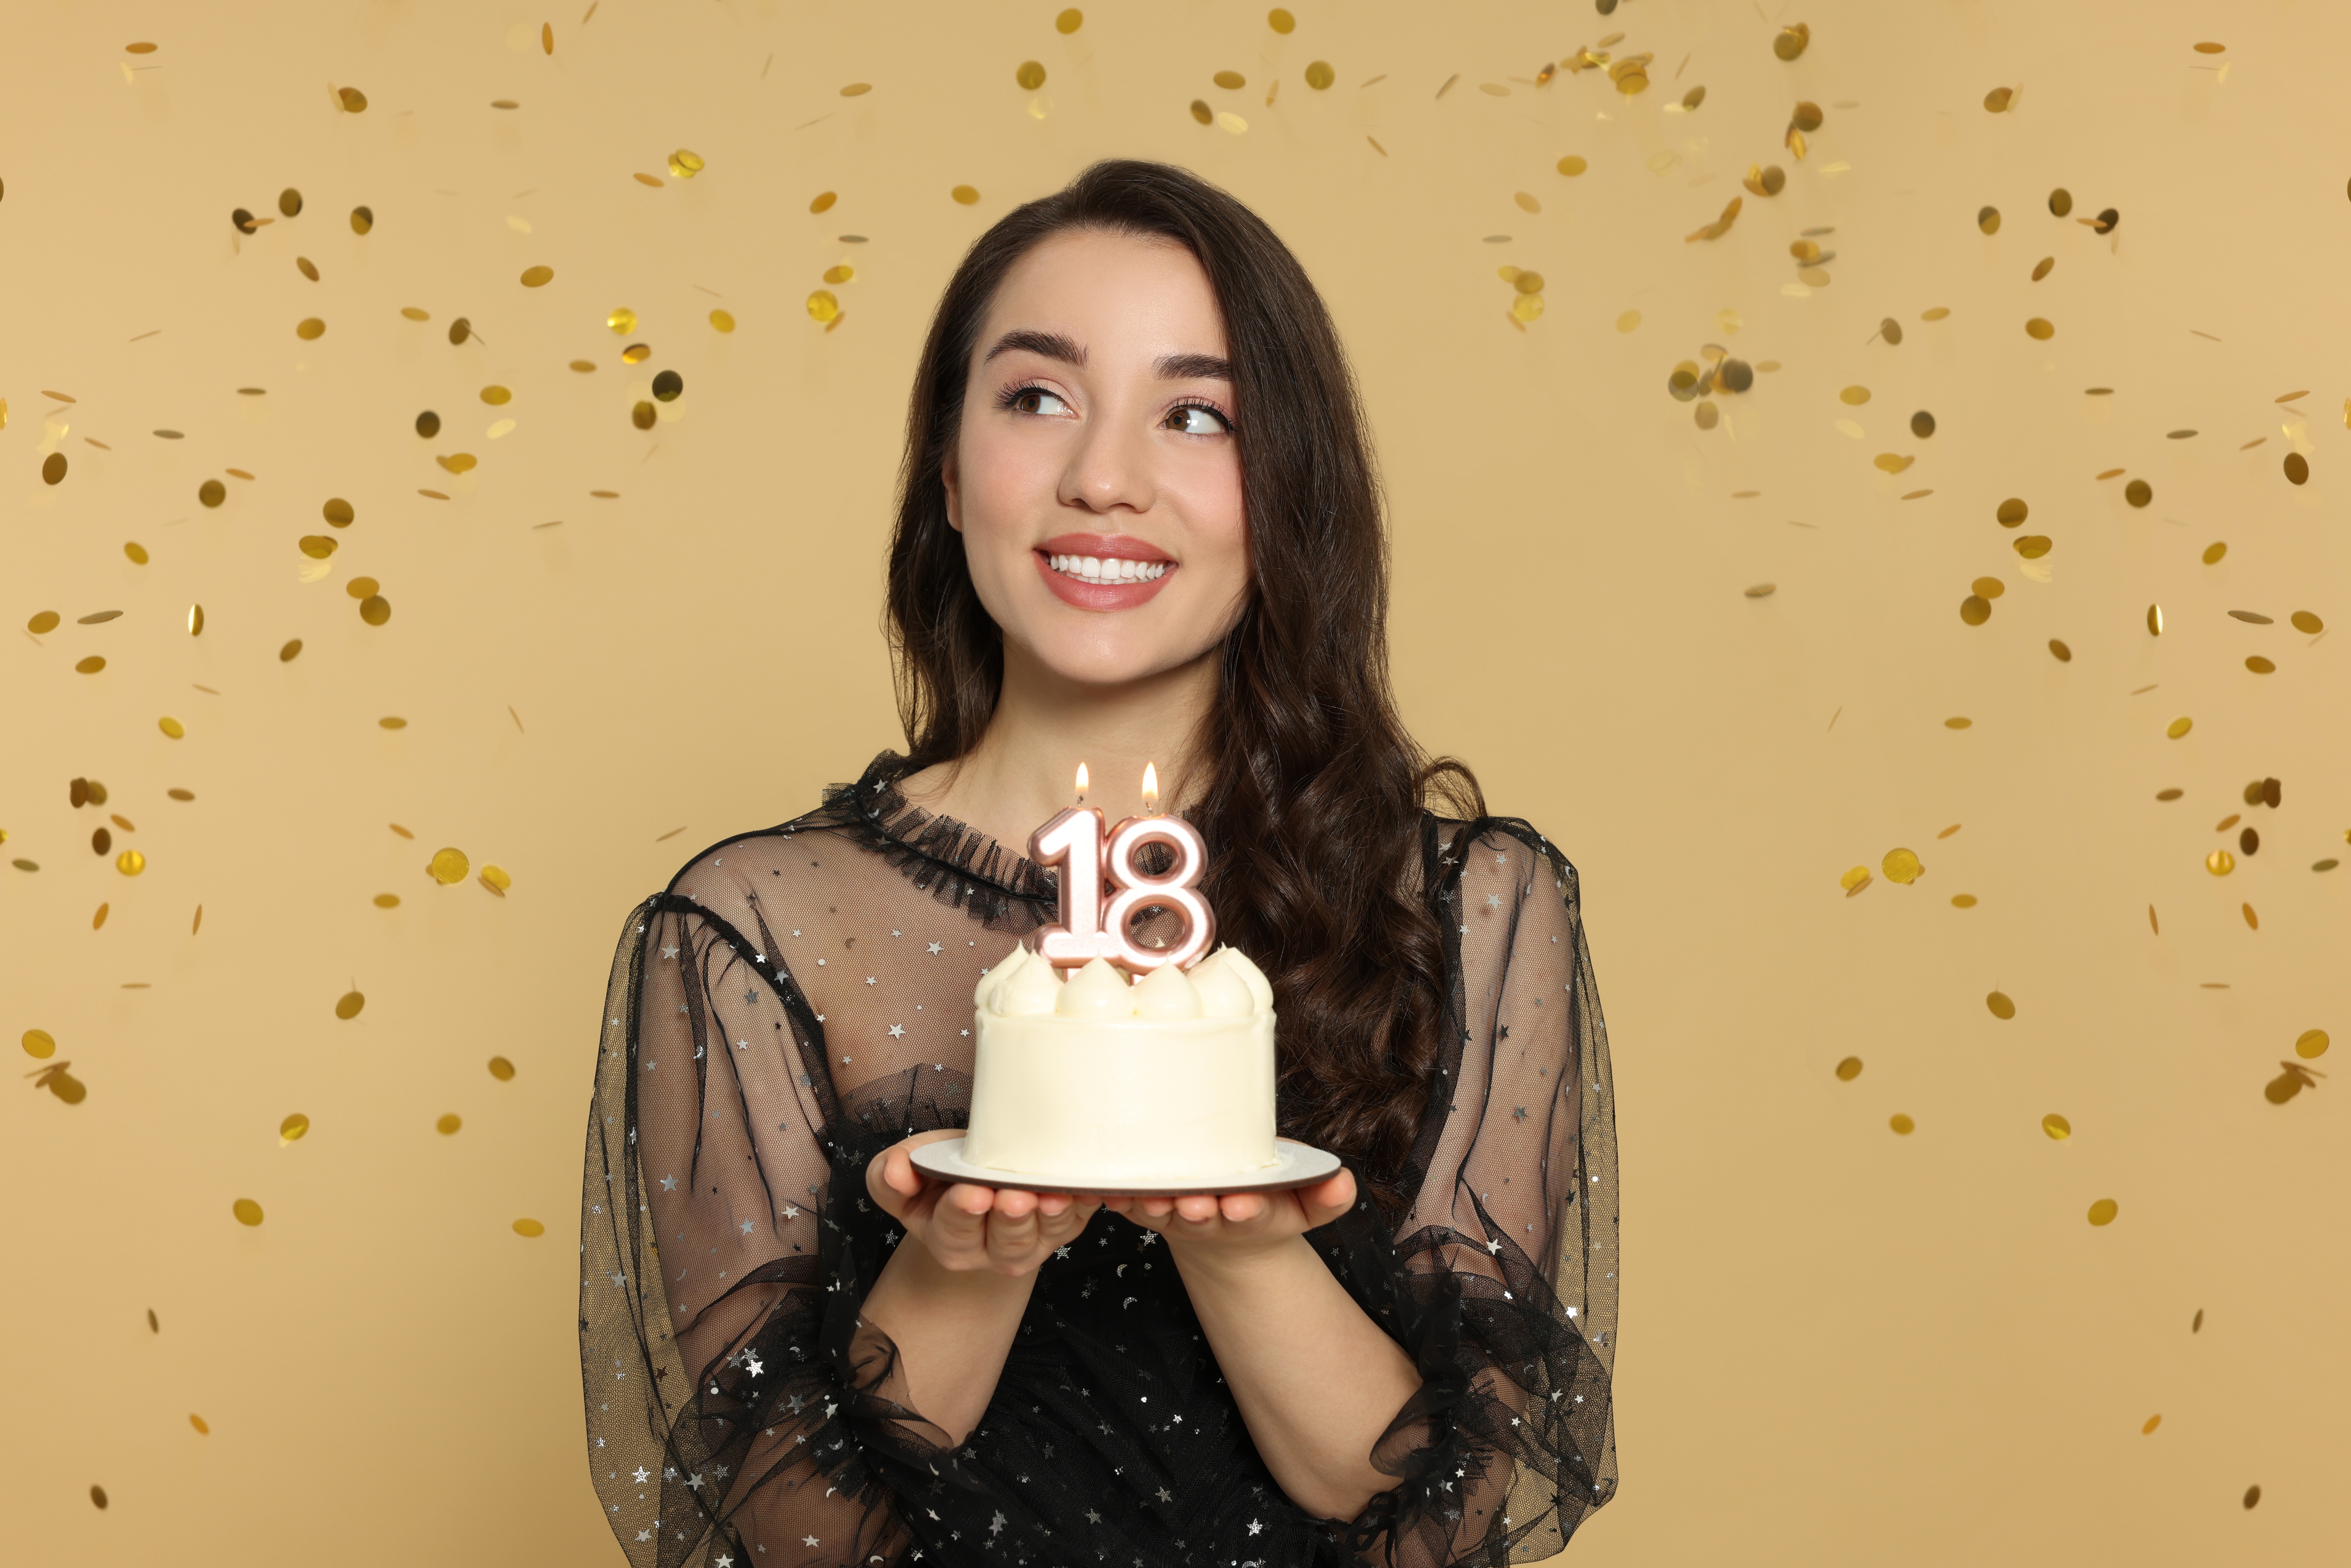 Young woman holding her 18th birthday cake | Source: Shutterstock